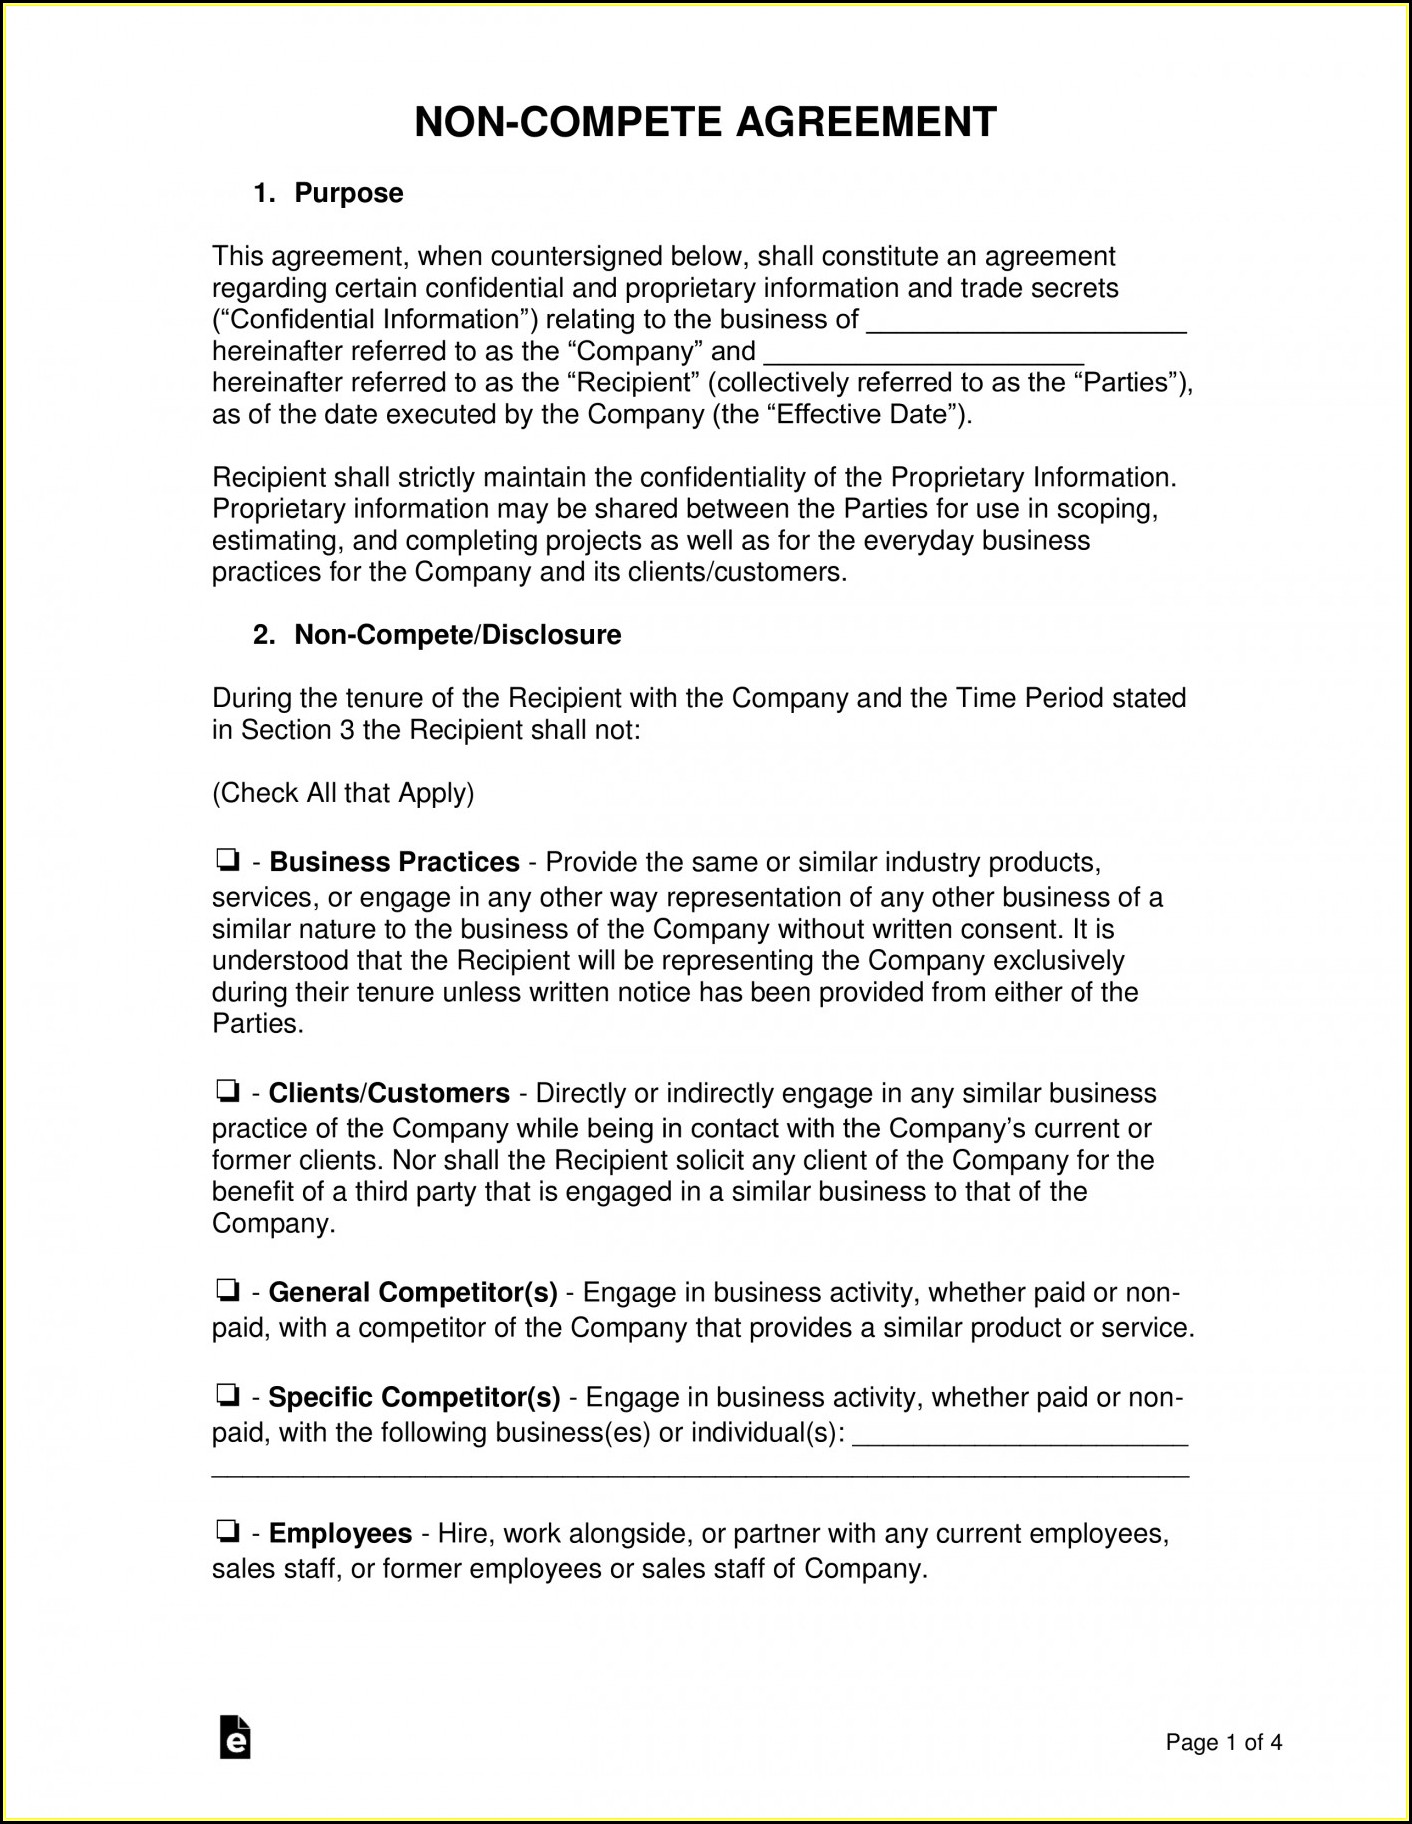 Employee Contracts Templates Free